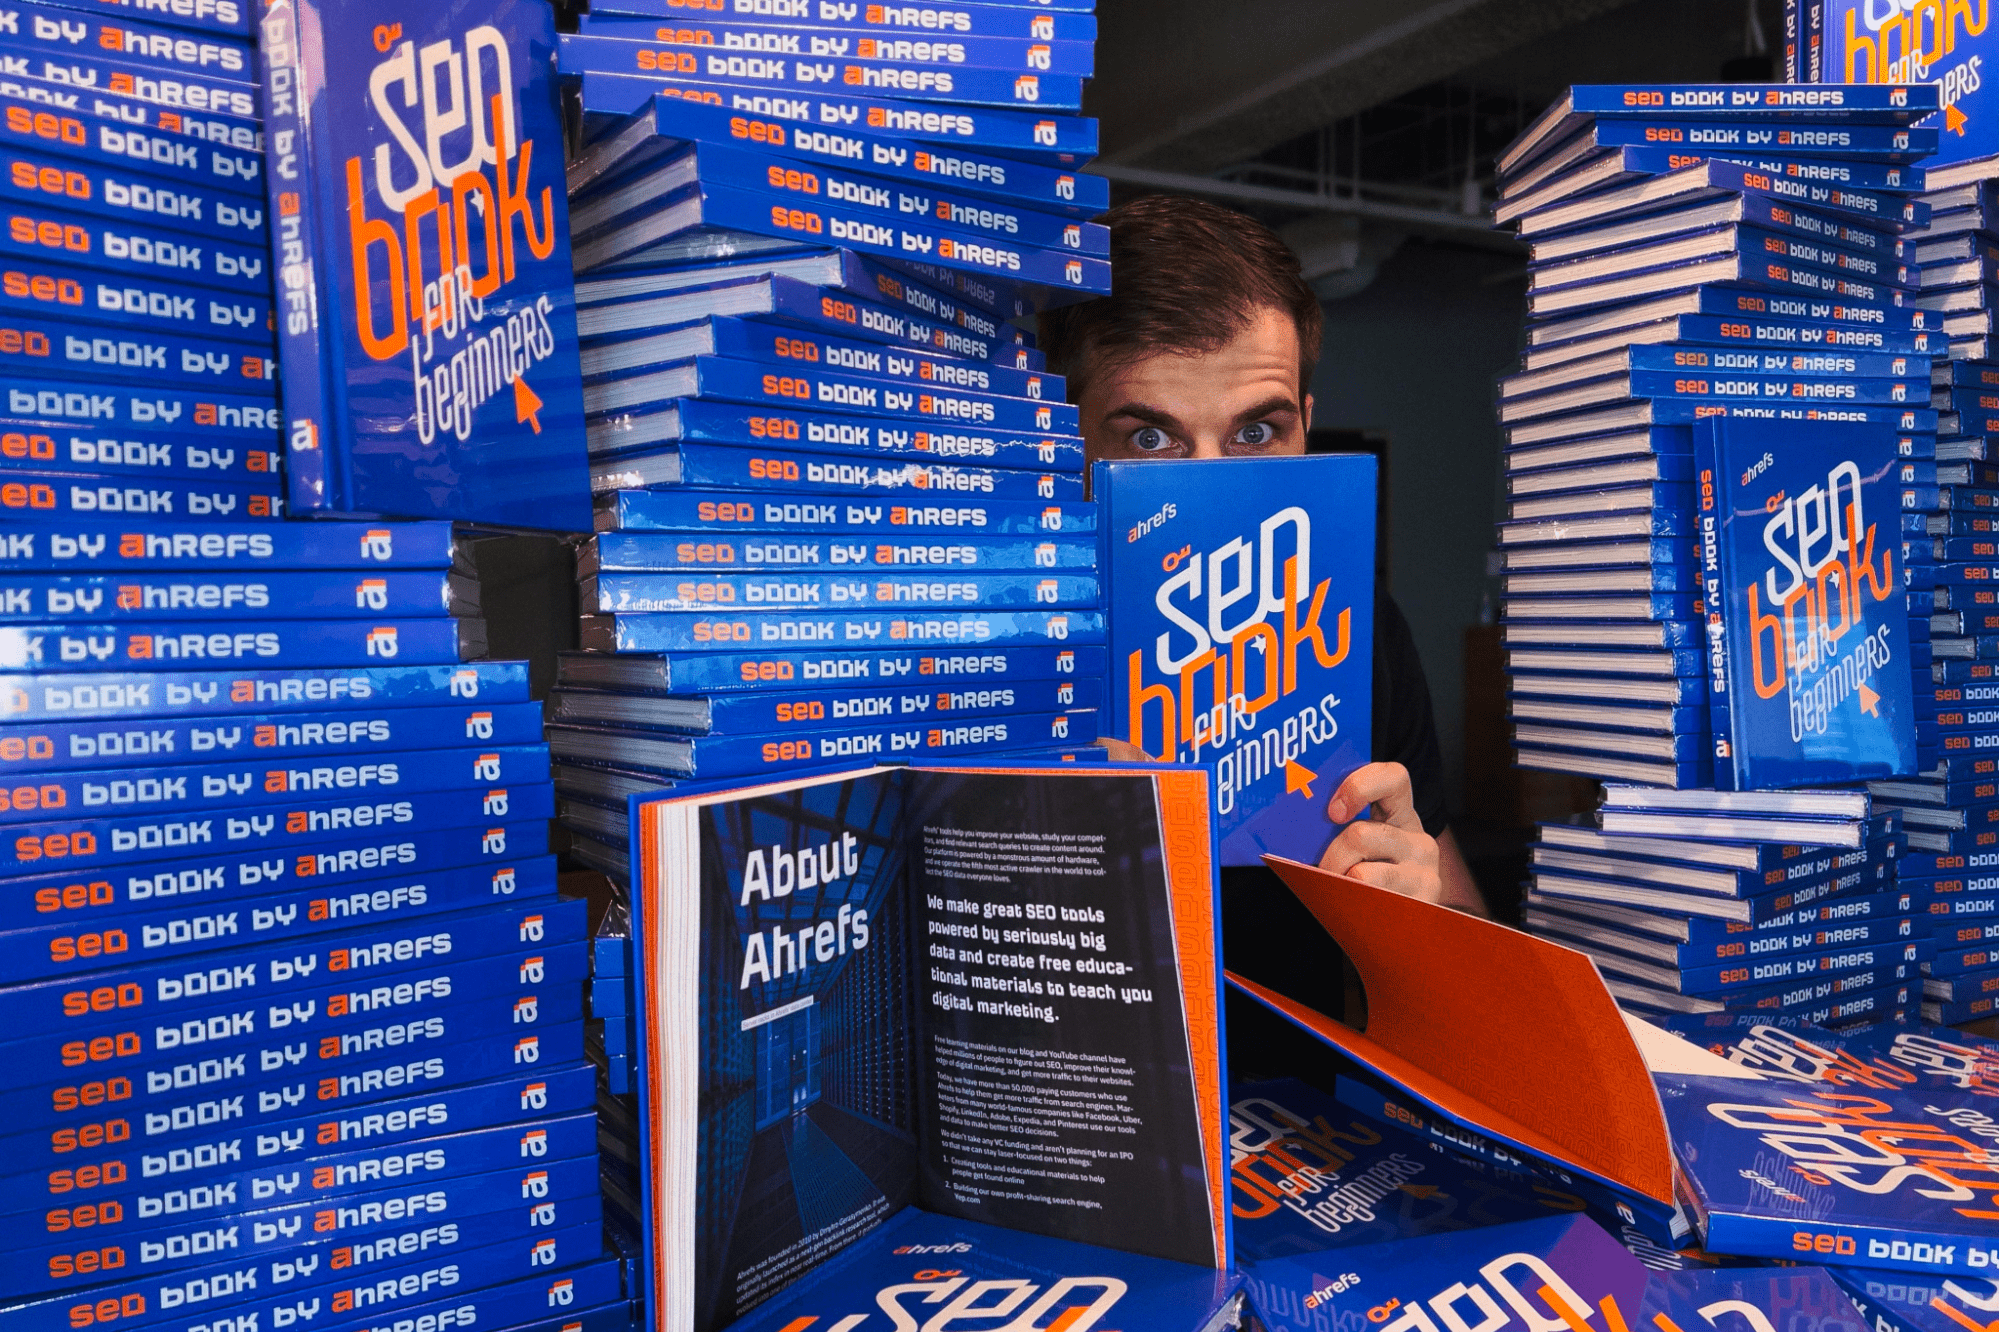 Ahrefs CMO Tim Soulo amid stacks of the company's book, "SEO Book for Beginners"
